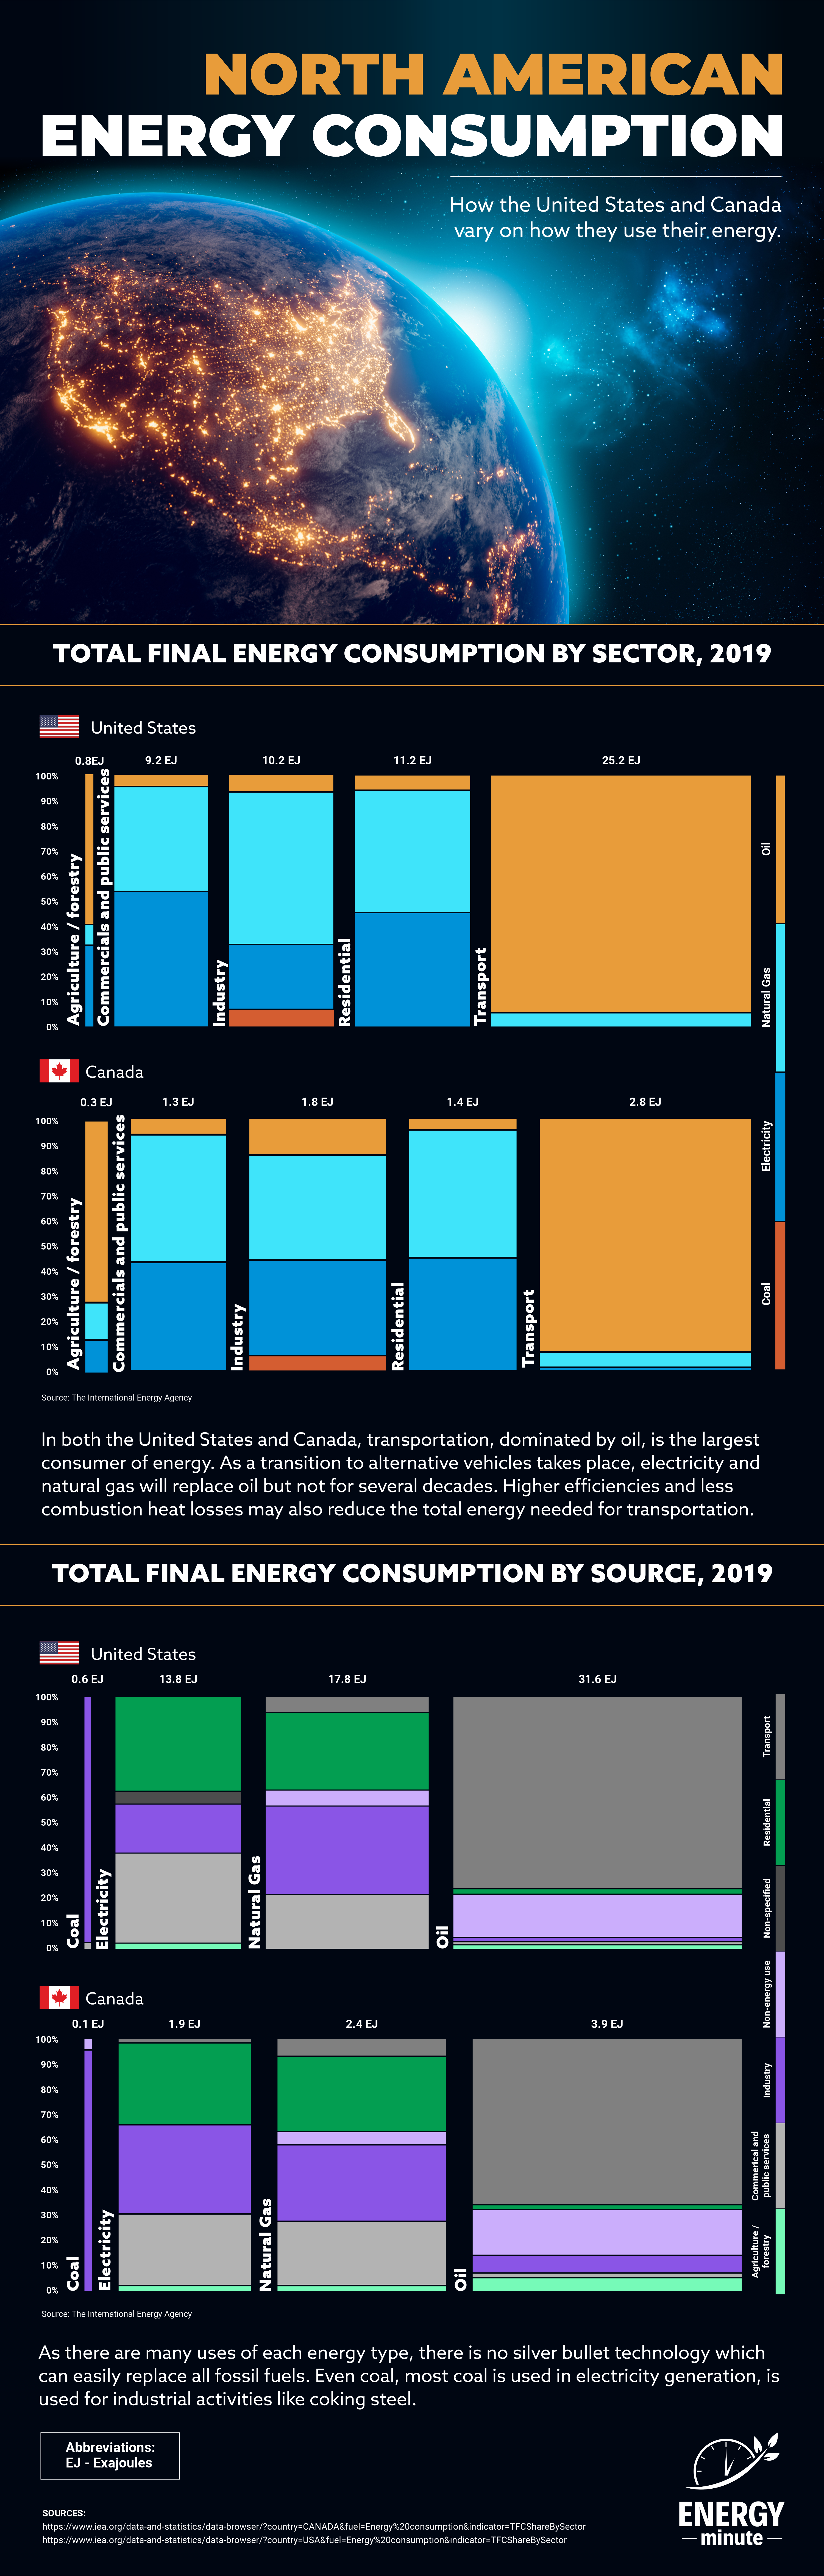 The energy consumption of the United States and Canada